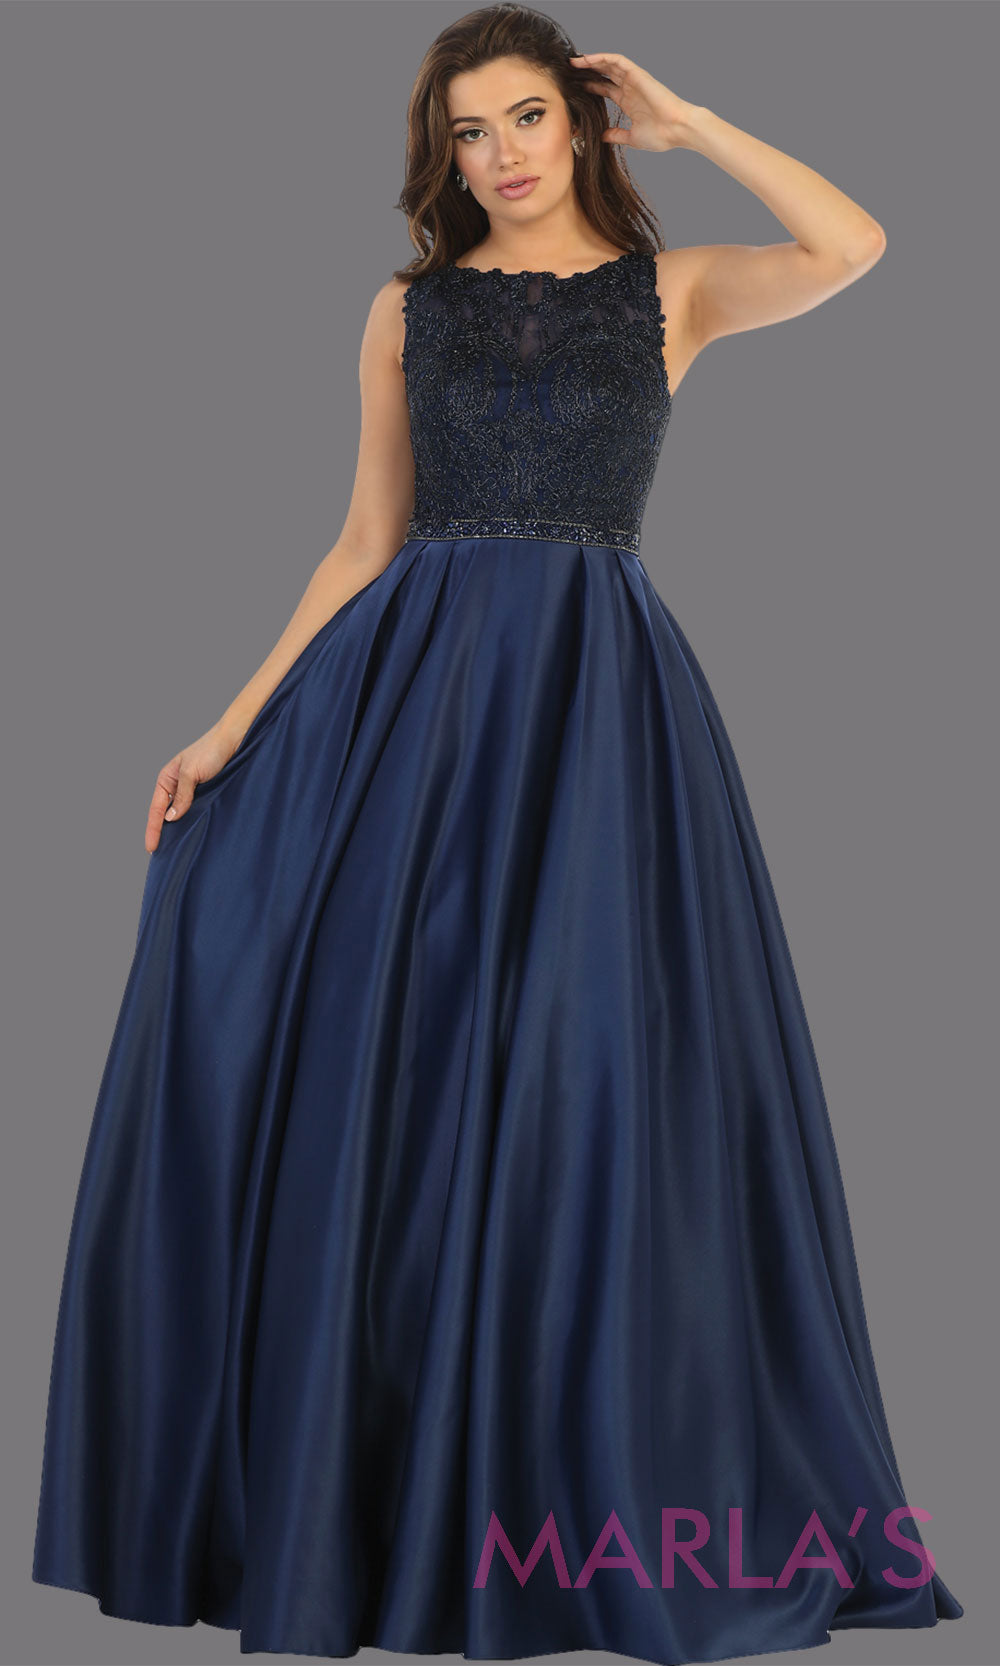 Long navy blue high neck taffeta satin gown with lace top from MayQueen RQ7744. This long dark blue gown is perfect for wedding engagement dress, reception dress, modest prom dress, modest formal plus size evening gown, mother of the bride